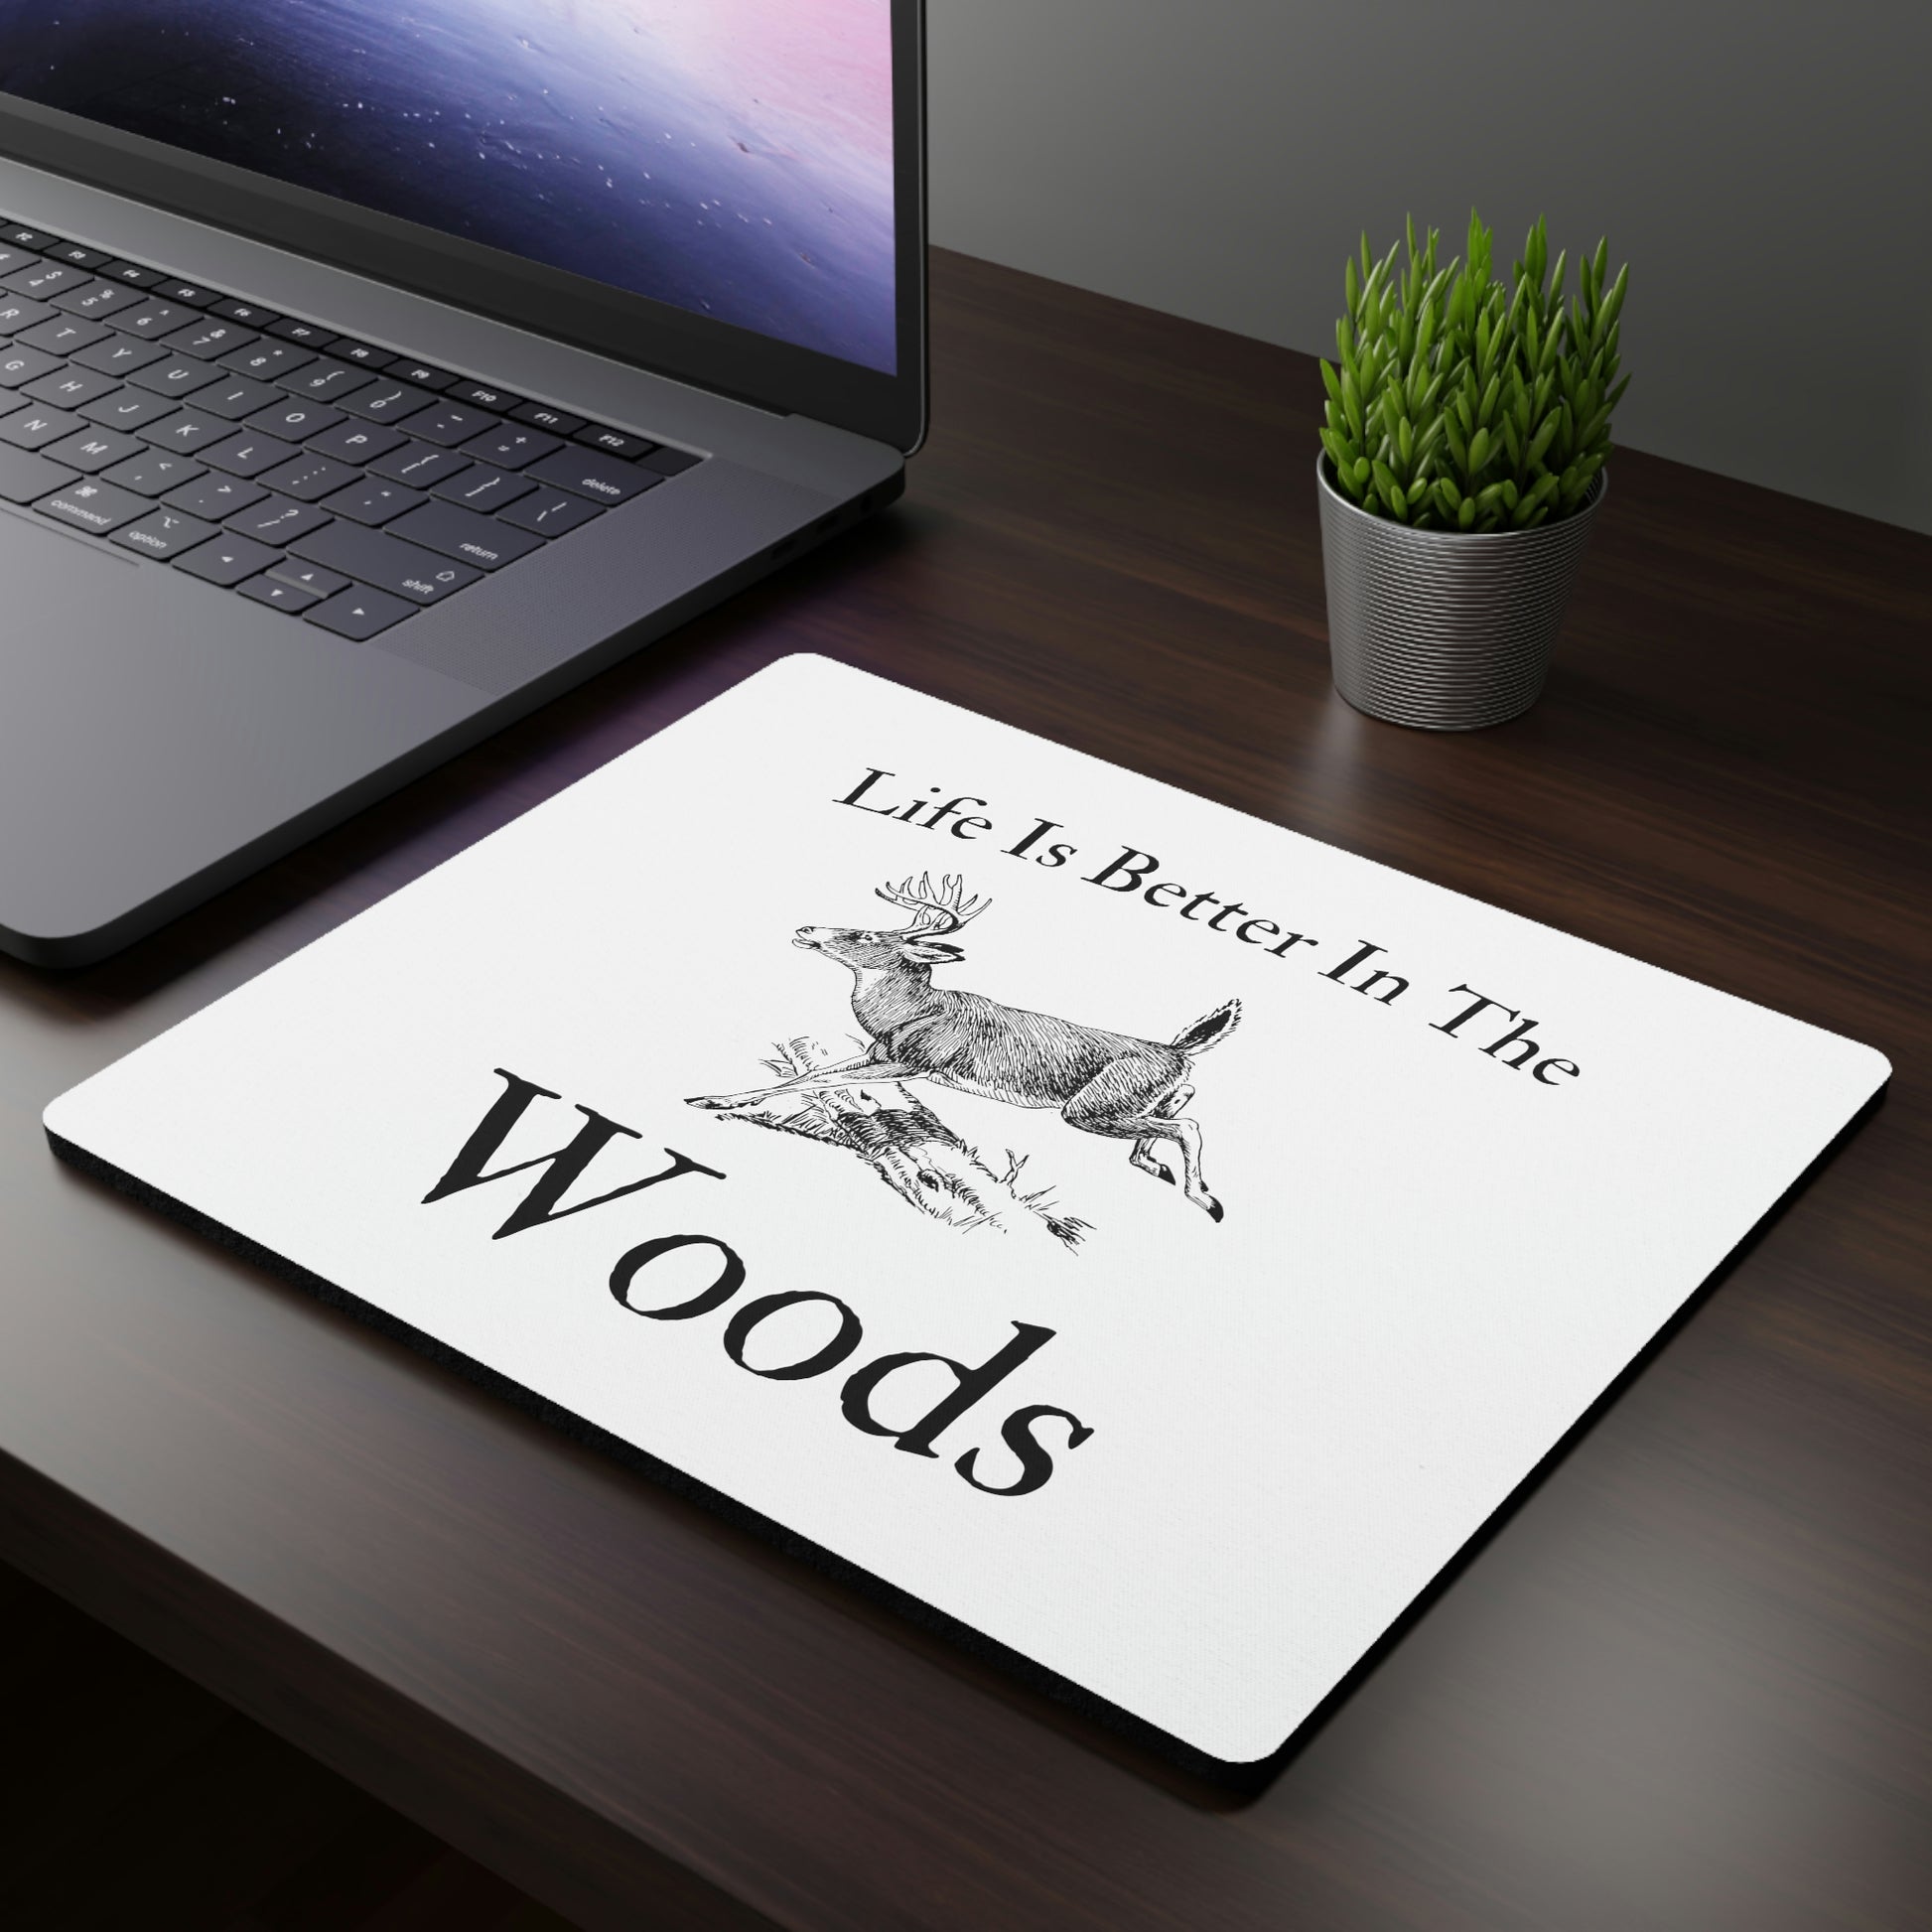 "Life Is Better In The Woods" Mousepad - Weave Got Gifts - Unique Gifts You Won’t Find Anywhere Else!